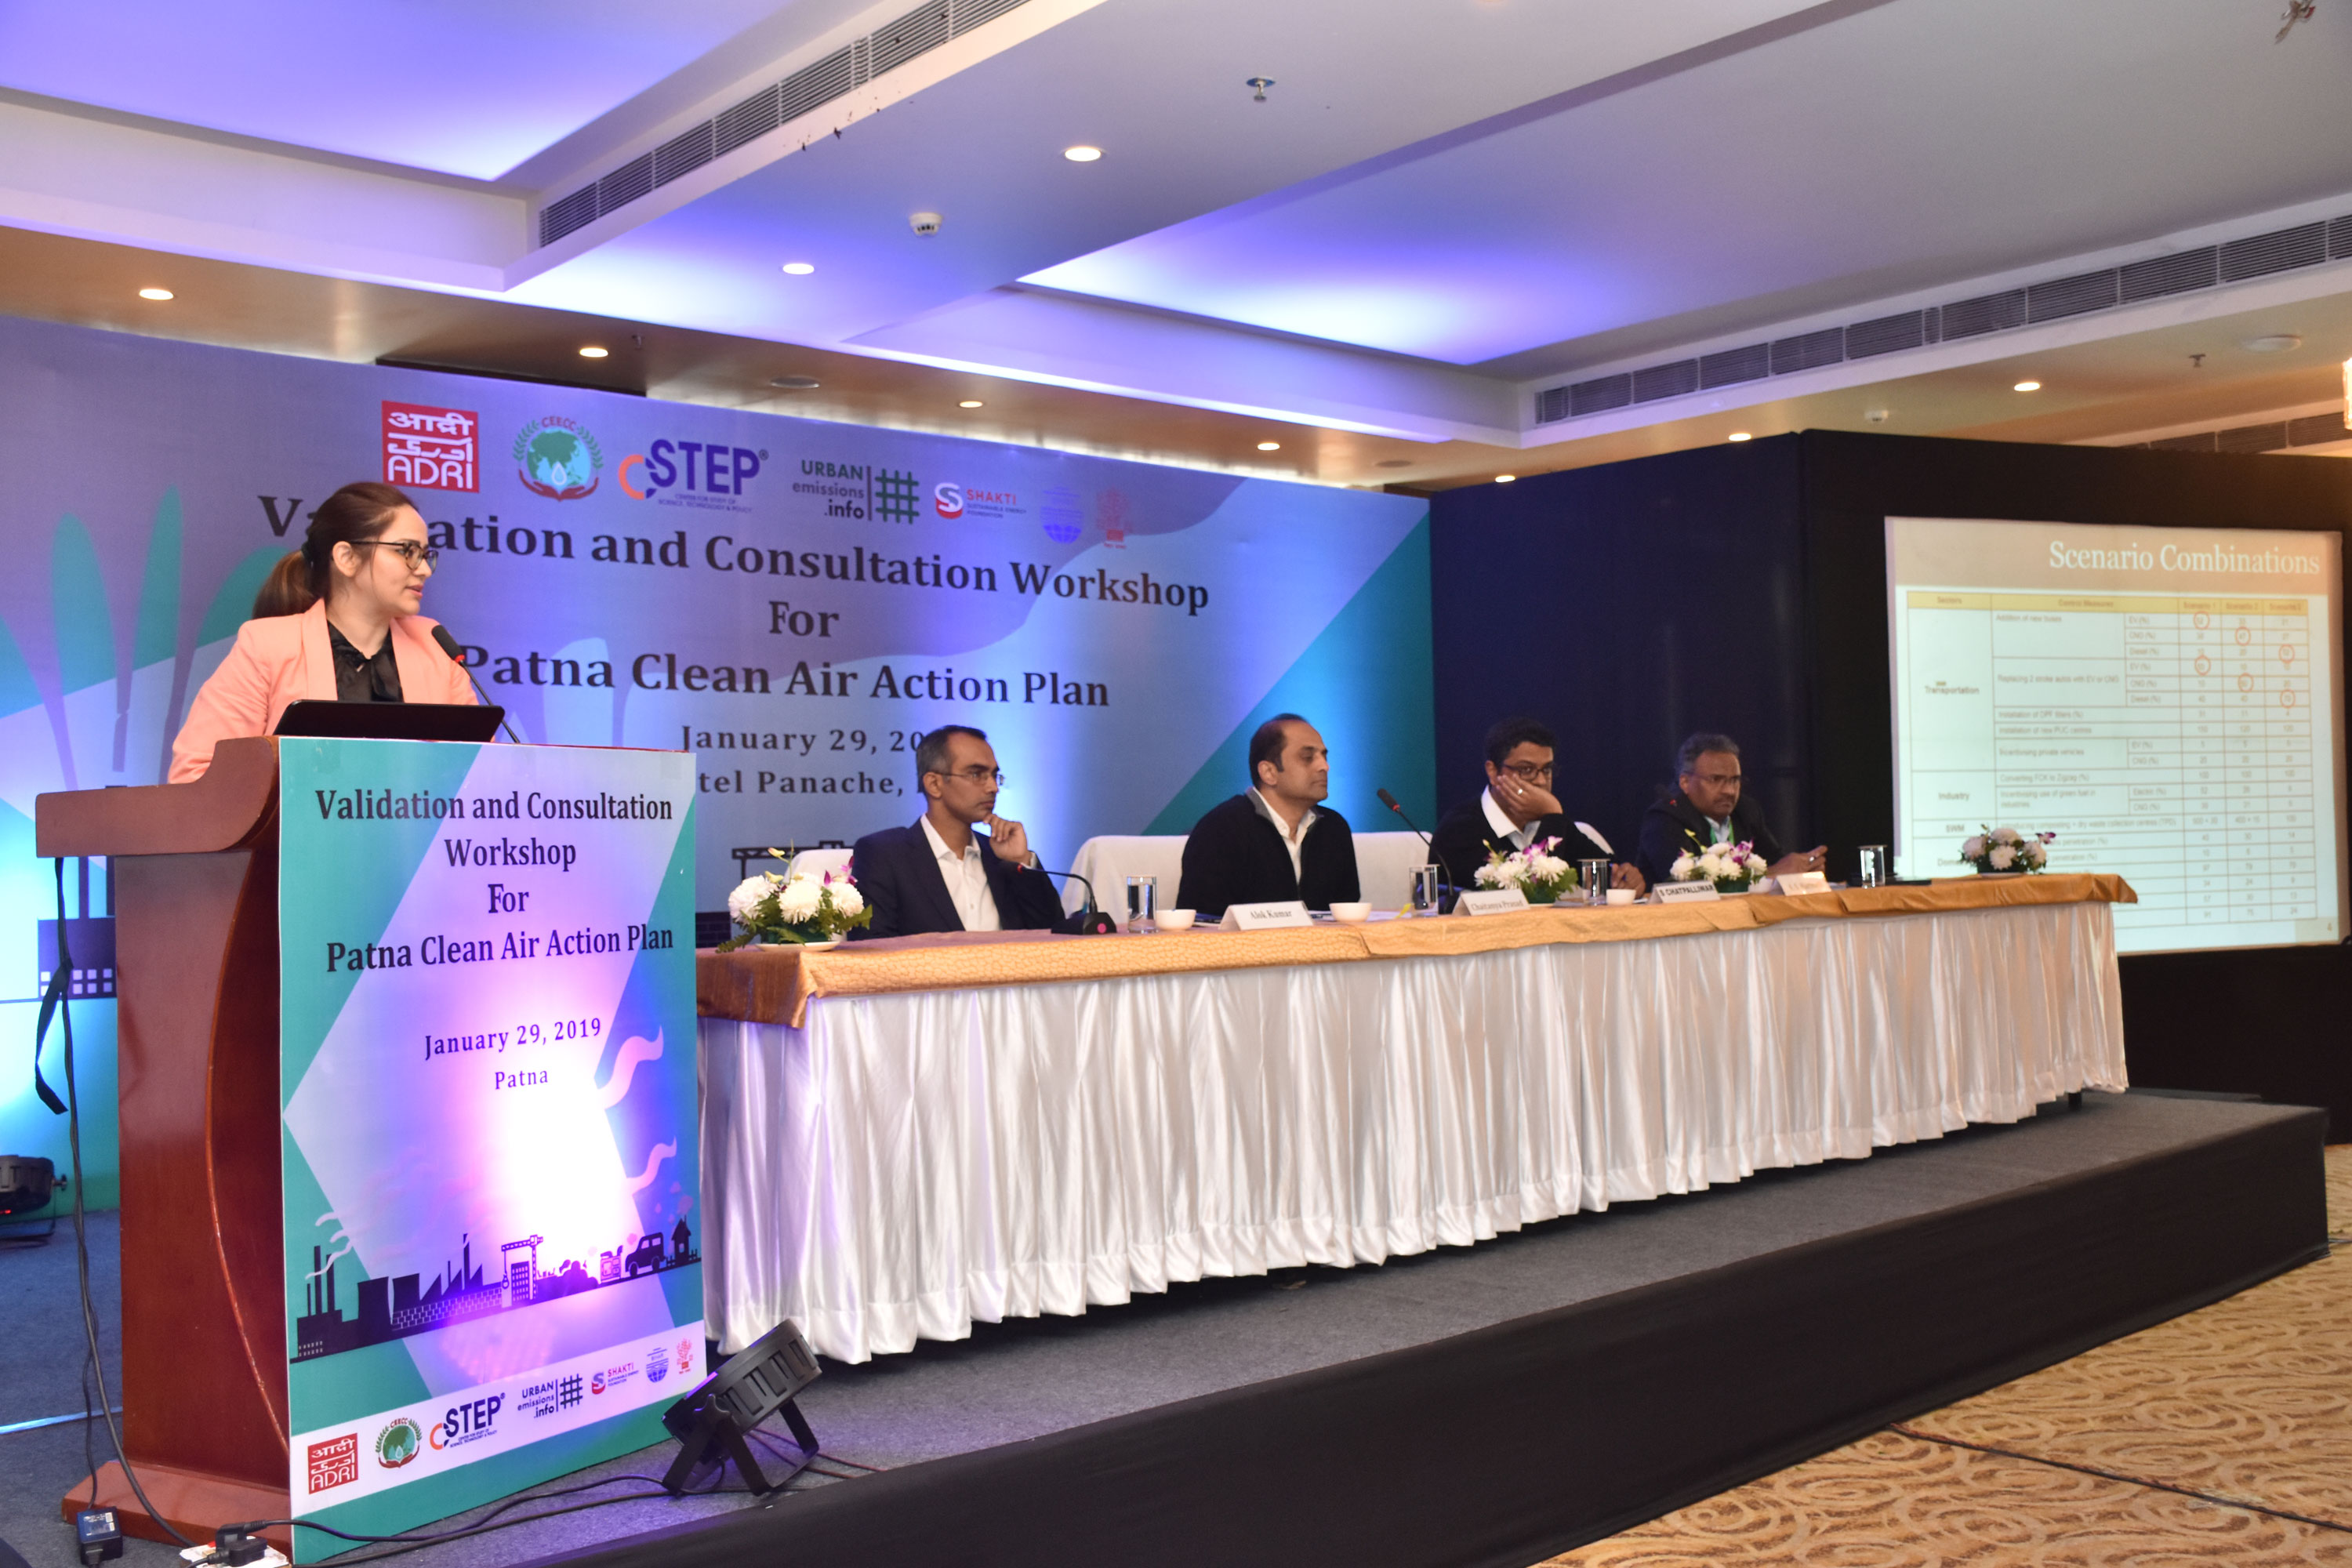 Validation and Consultation Workshop for Patna Clean Air Action Plan (PCAAP)